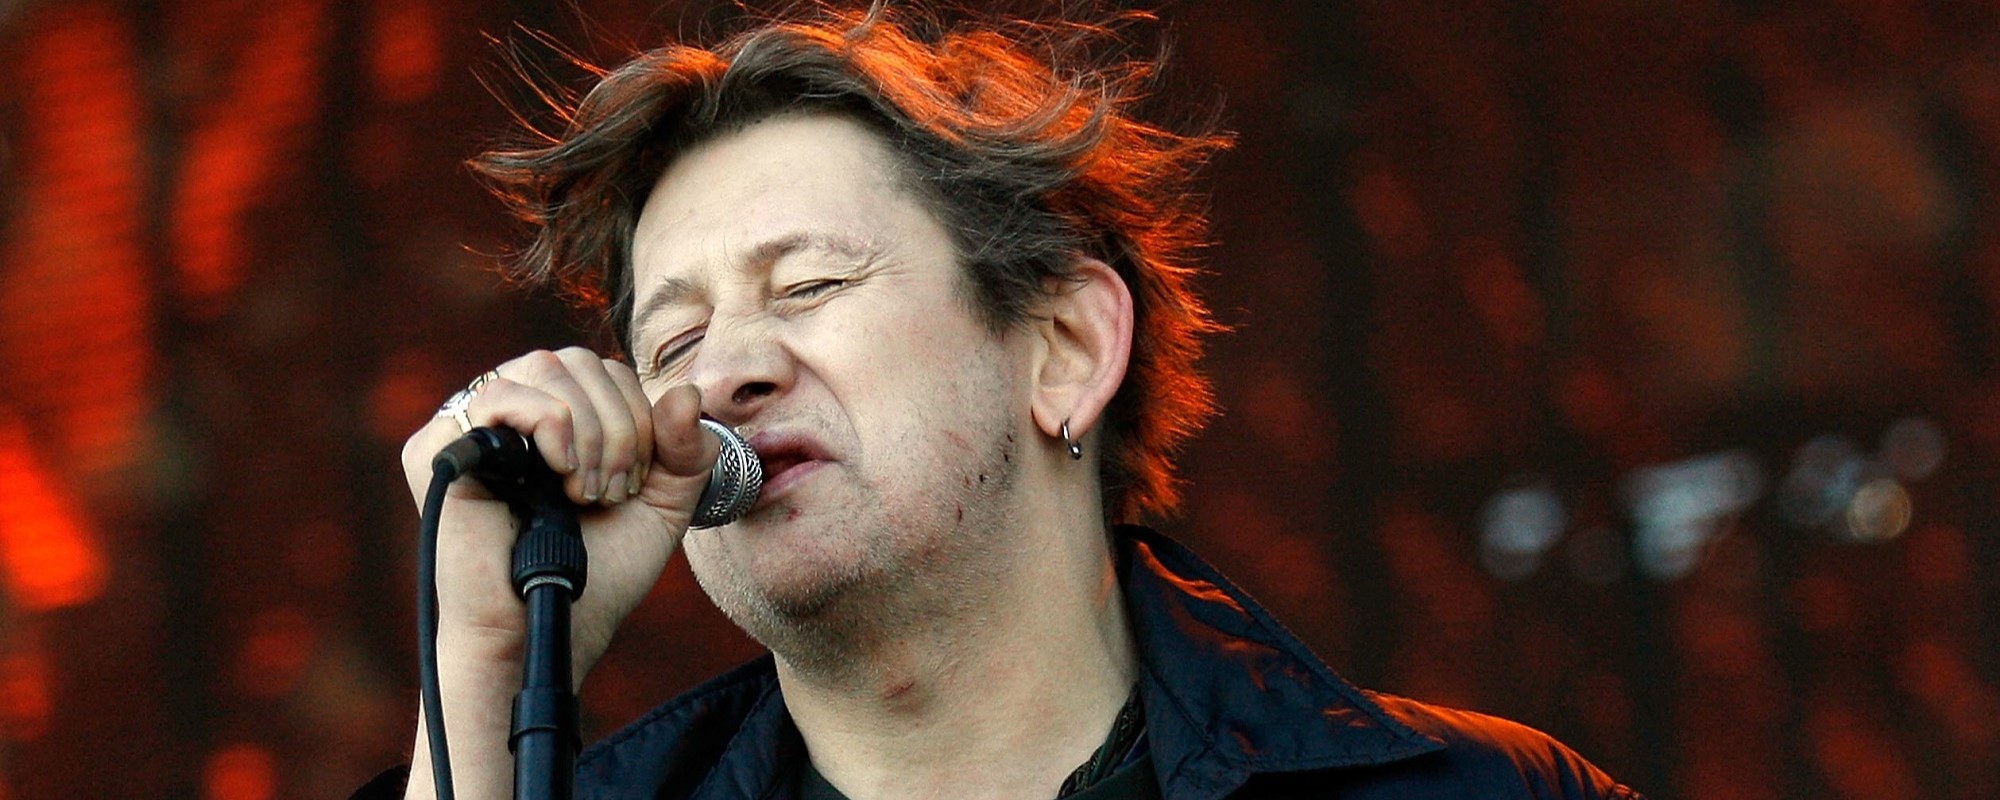 Shane MacGowan’s Widow Says It’s “Hard to Believe” He’s Being Laid to Rest This Week in Emotional Post